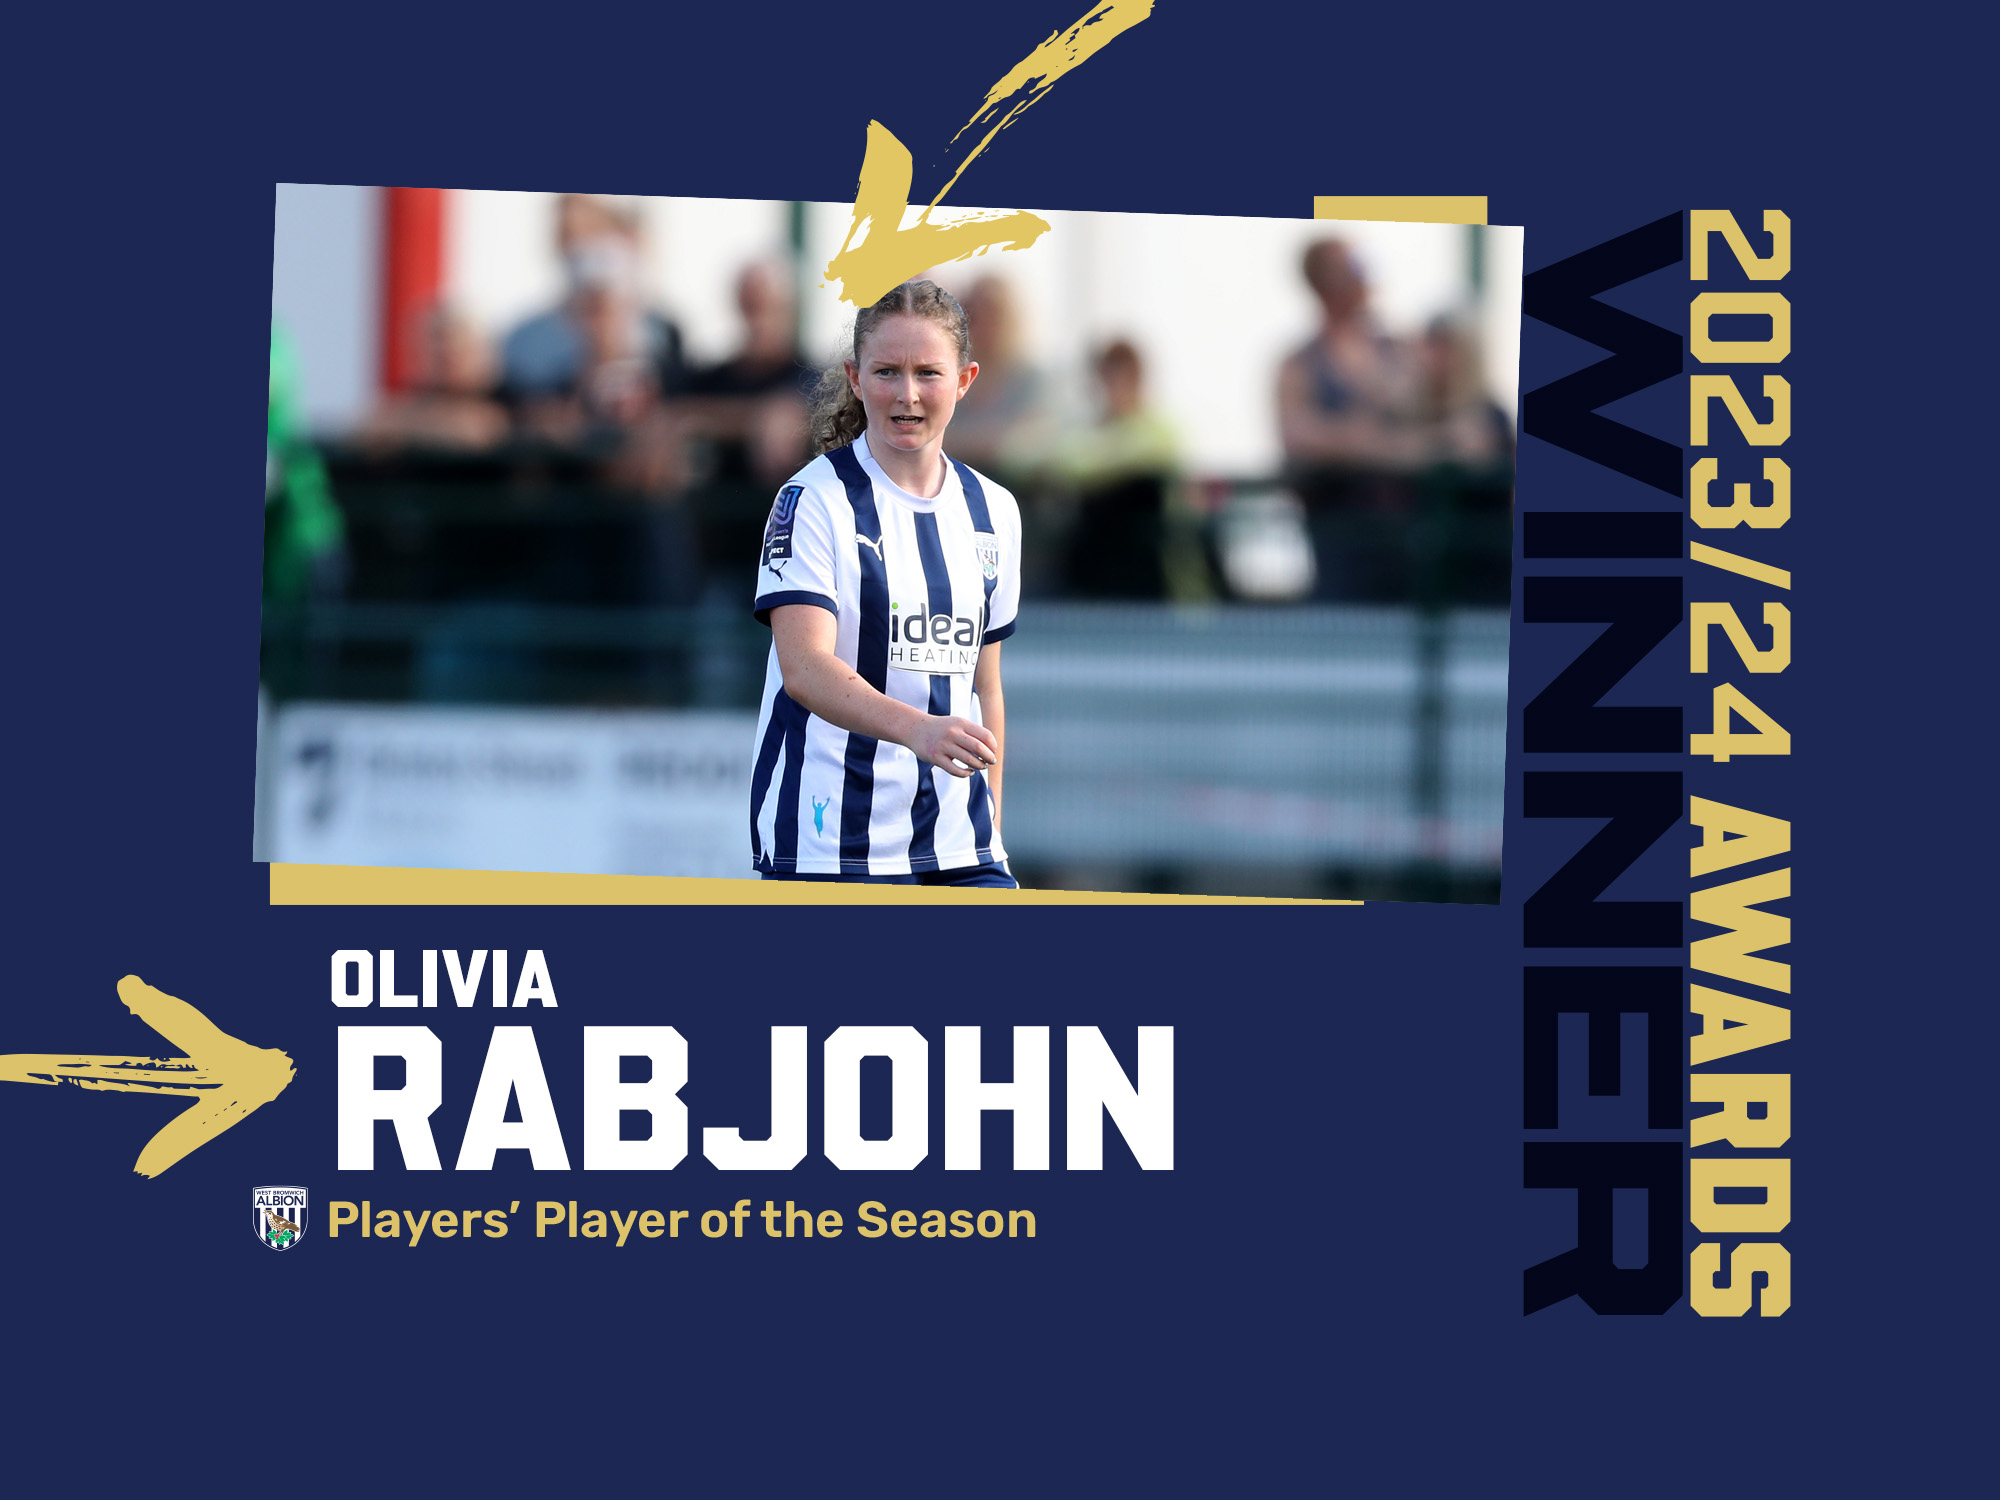 Olivia Rabjohn's Players' Player of the Season graphic with an image of her playing in the home kit on 